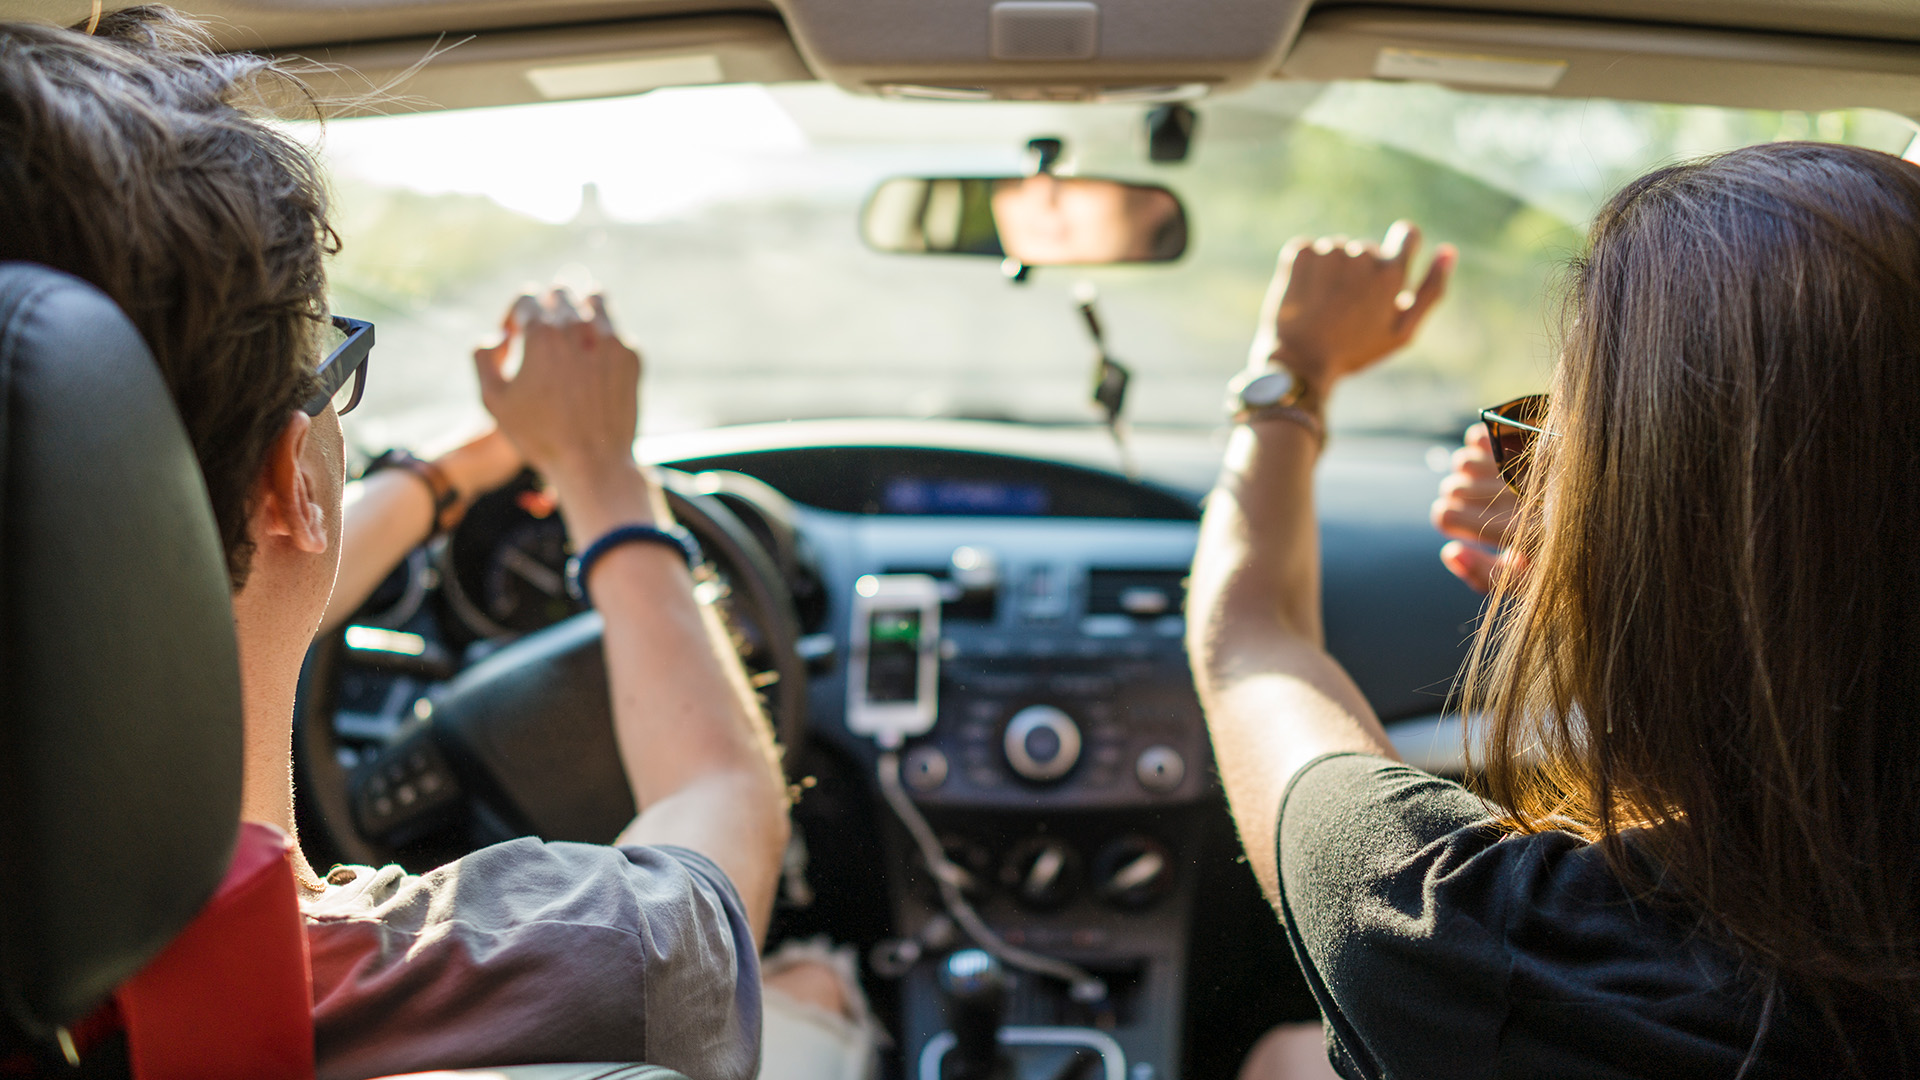 Friends dancing while on a road trip during beautiful summer day - stock photo